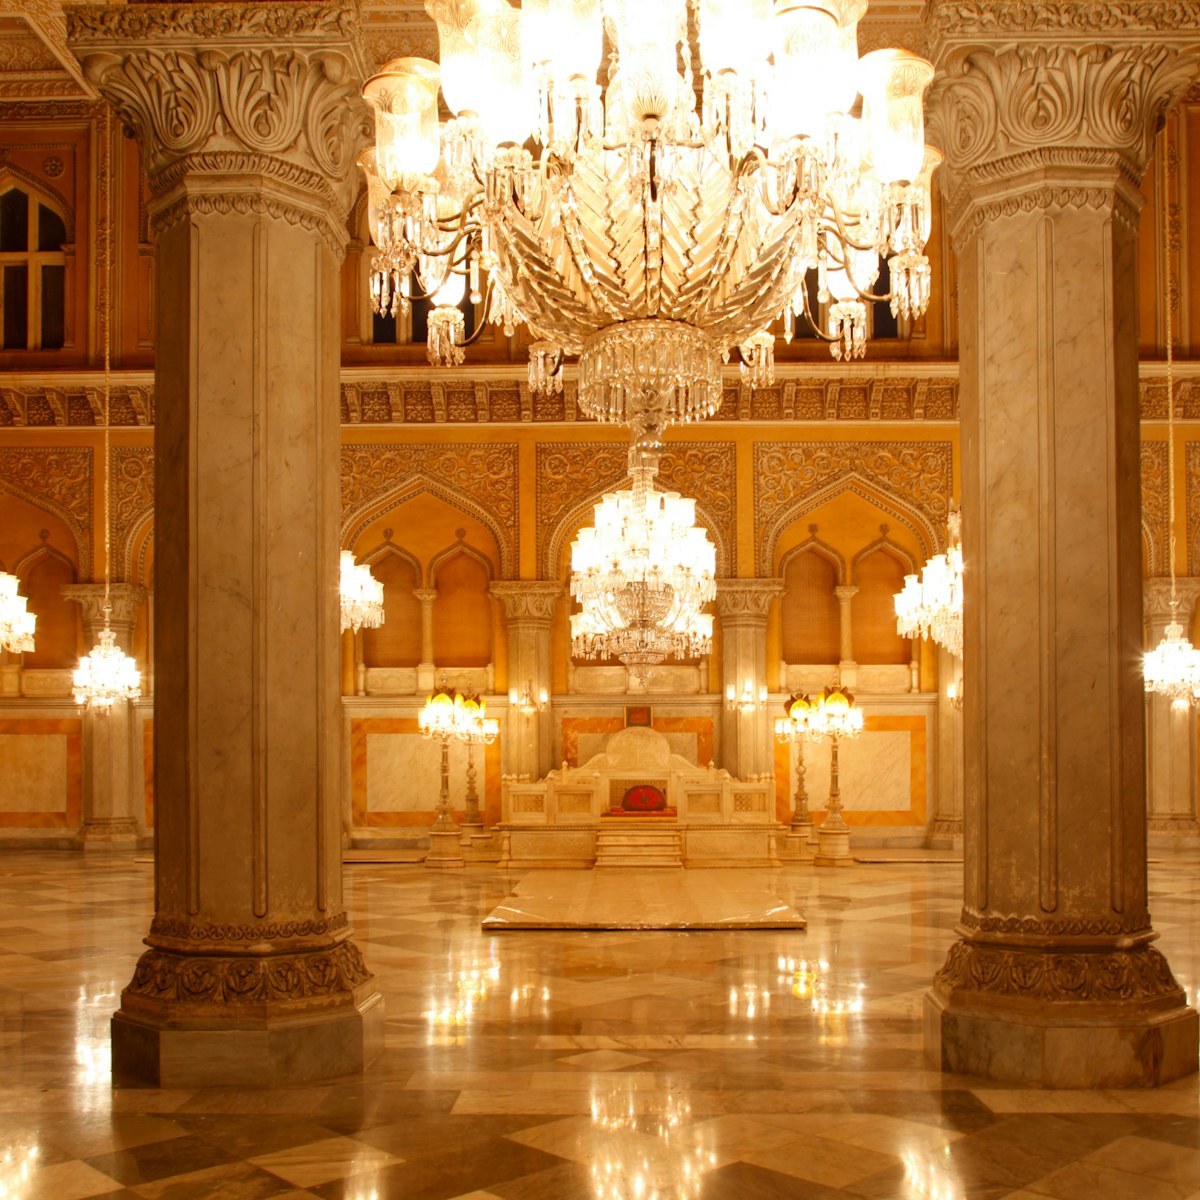 [UNVERIFIED CONTENT] The grand pillared Durbar Hall of Khilwat Mubarak, Chowmahalla Palace (or Chowmahallat), Hyderabad, Andhra Pradesh, India. The Hall features the marble platform on which the Takht-e-Nishan or the royal seat was laid and 19 spectacular crystal chandeliers. Chowmahalla Palace is a UNESCO World Heritage site.